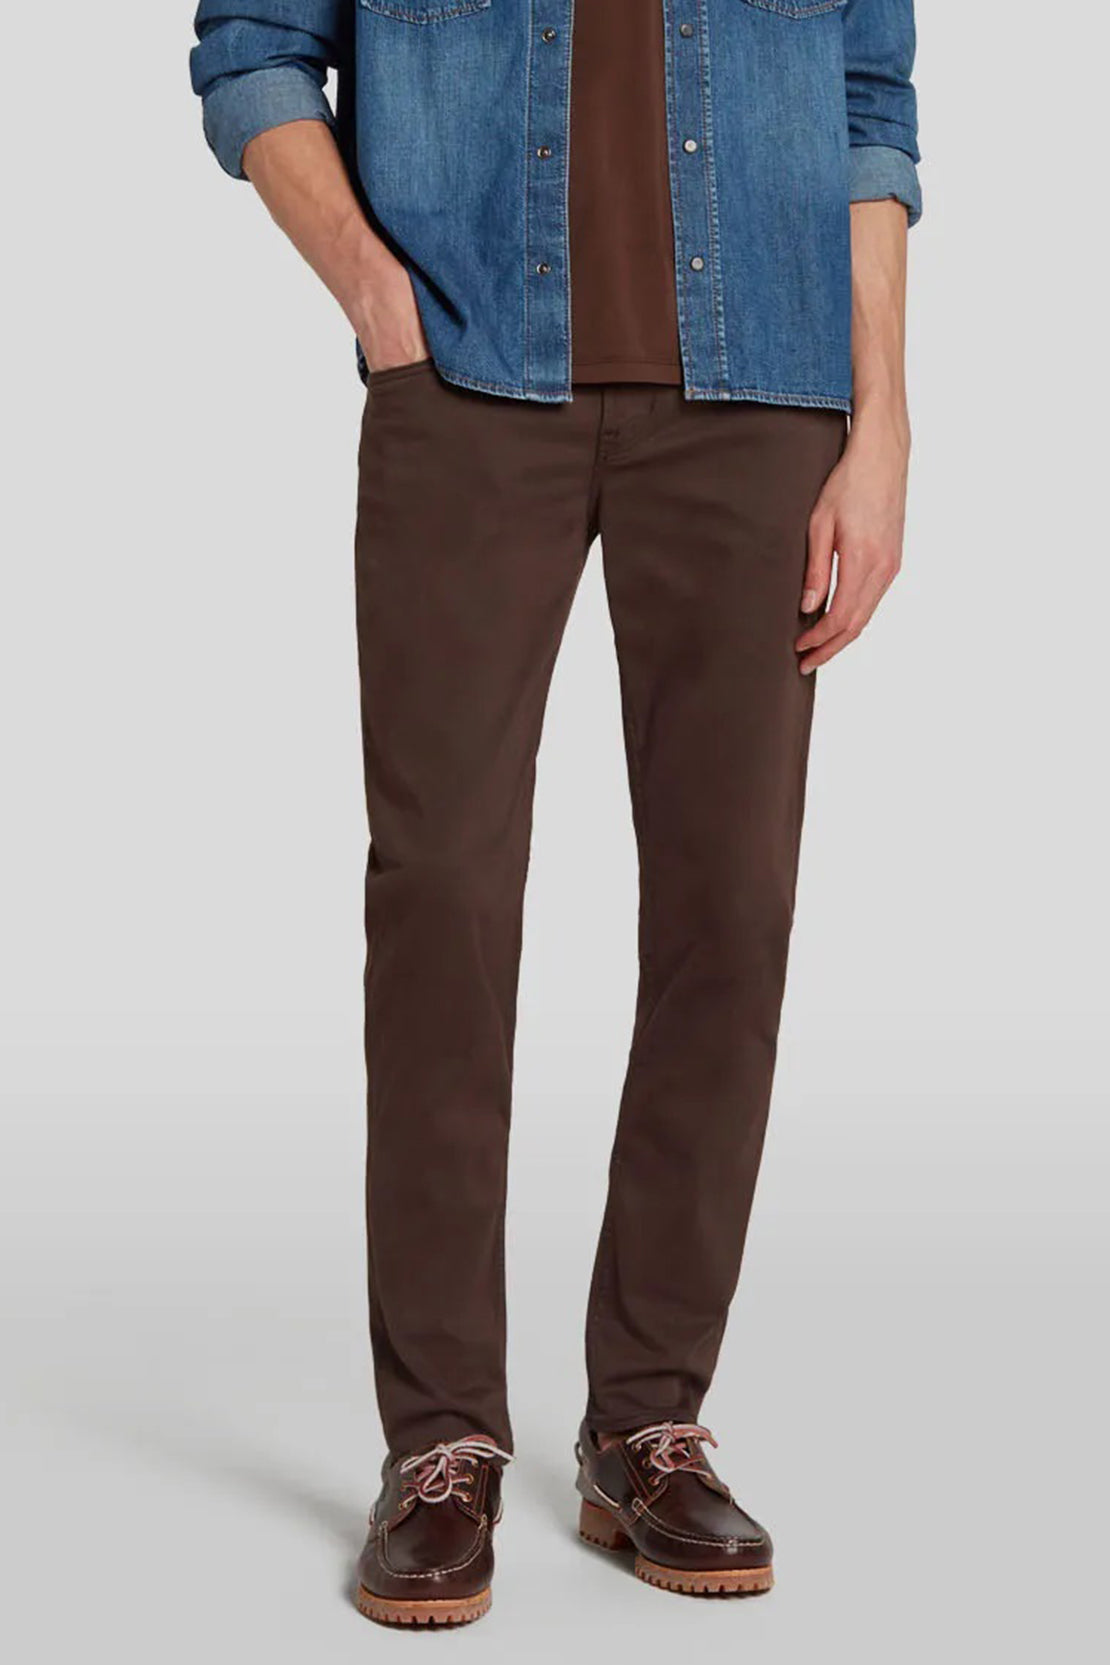 7 FOR ALL MANKIND - SLIMMY TAPERED Luxe Performance Plus Colour In Chestnut JSMXV600CH